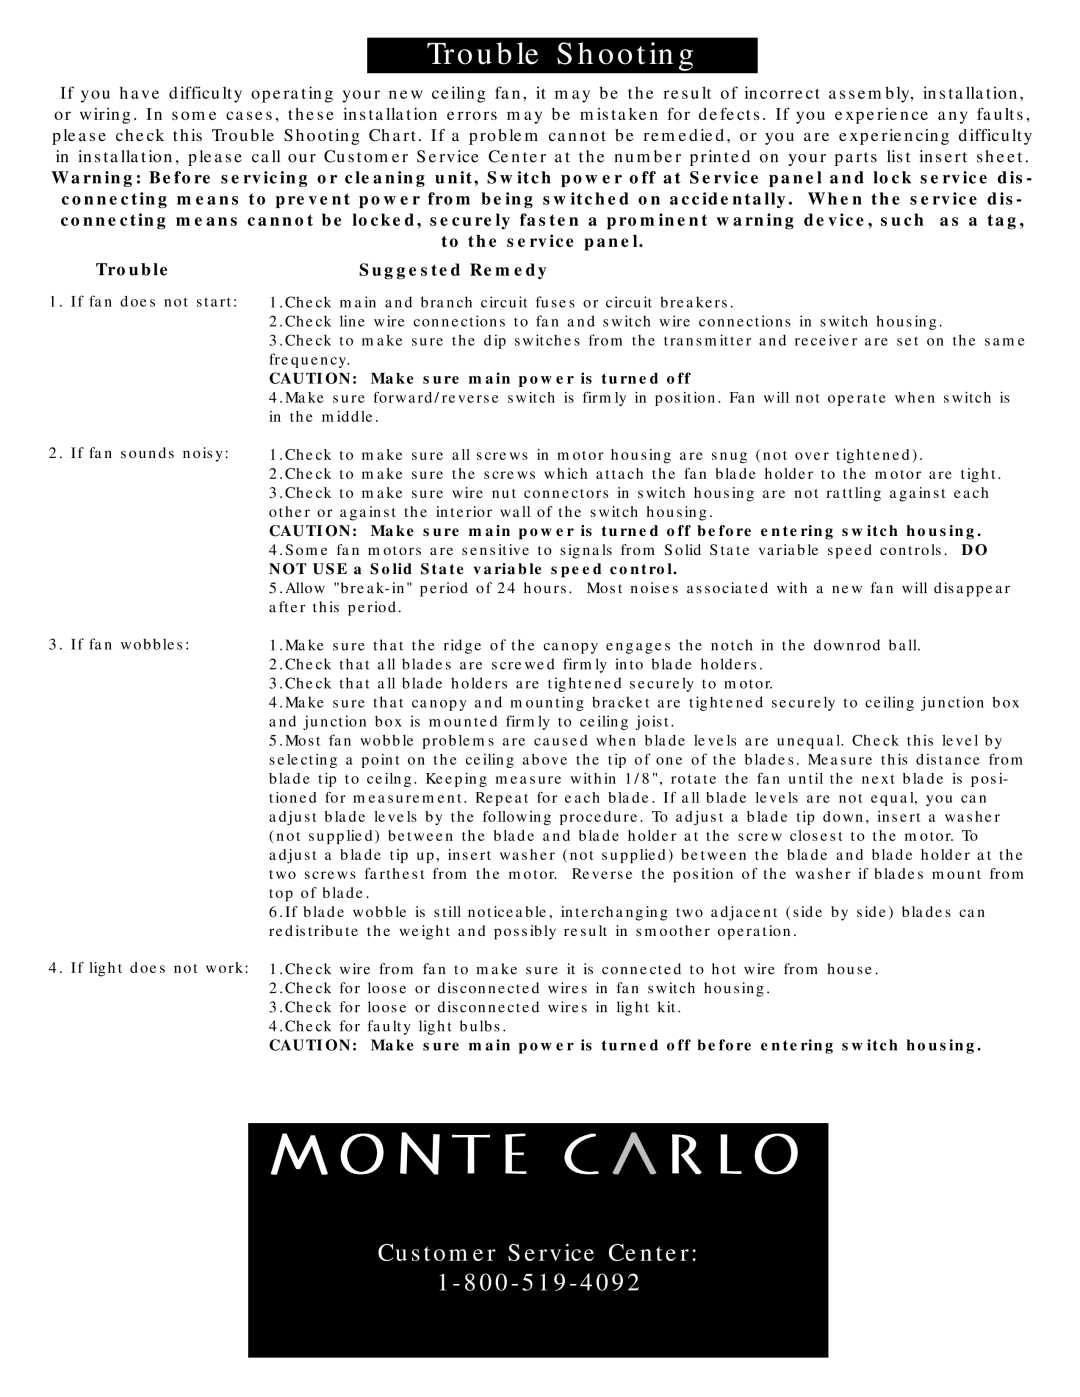 Monte Carlo Fan Company 5LNR52XXD Series owner manual Suggested Remedy, CAUTION Make sure main power is turned off 